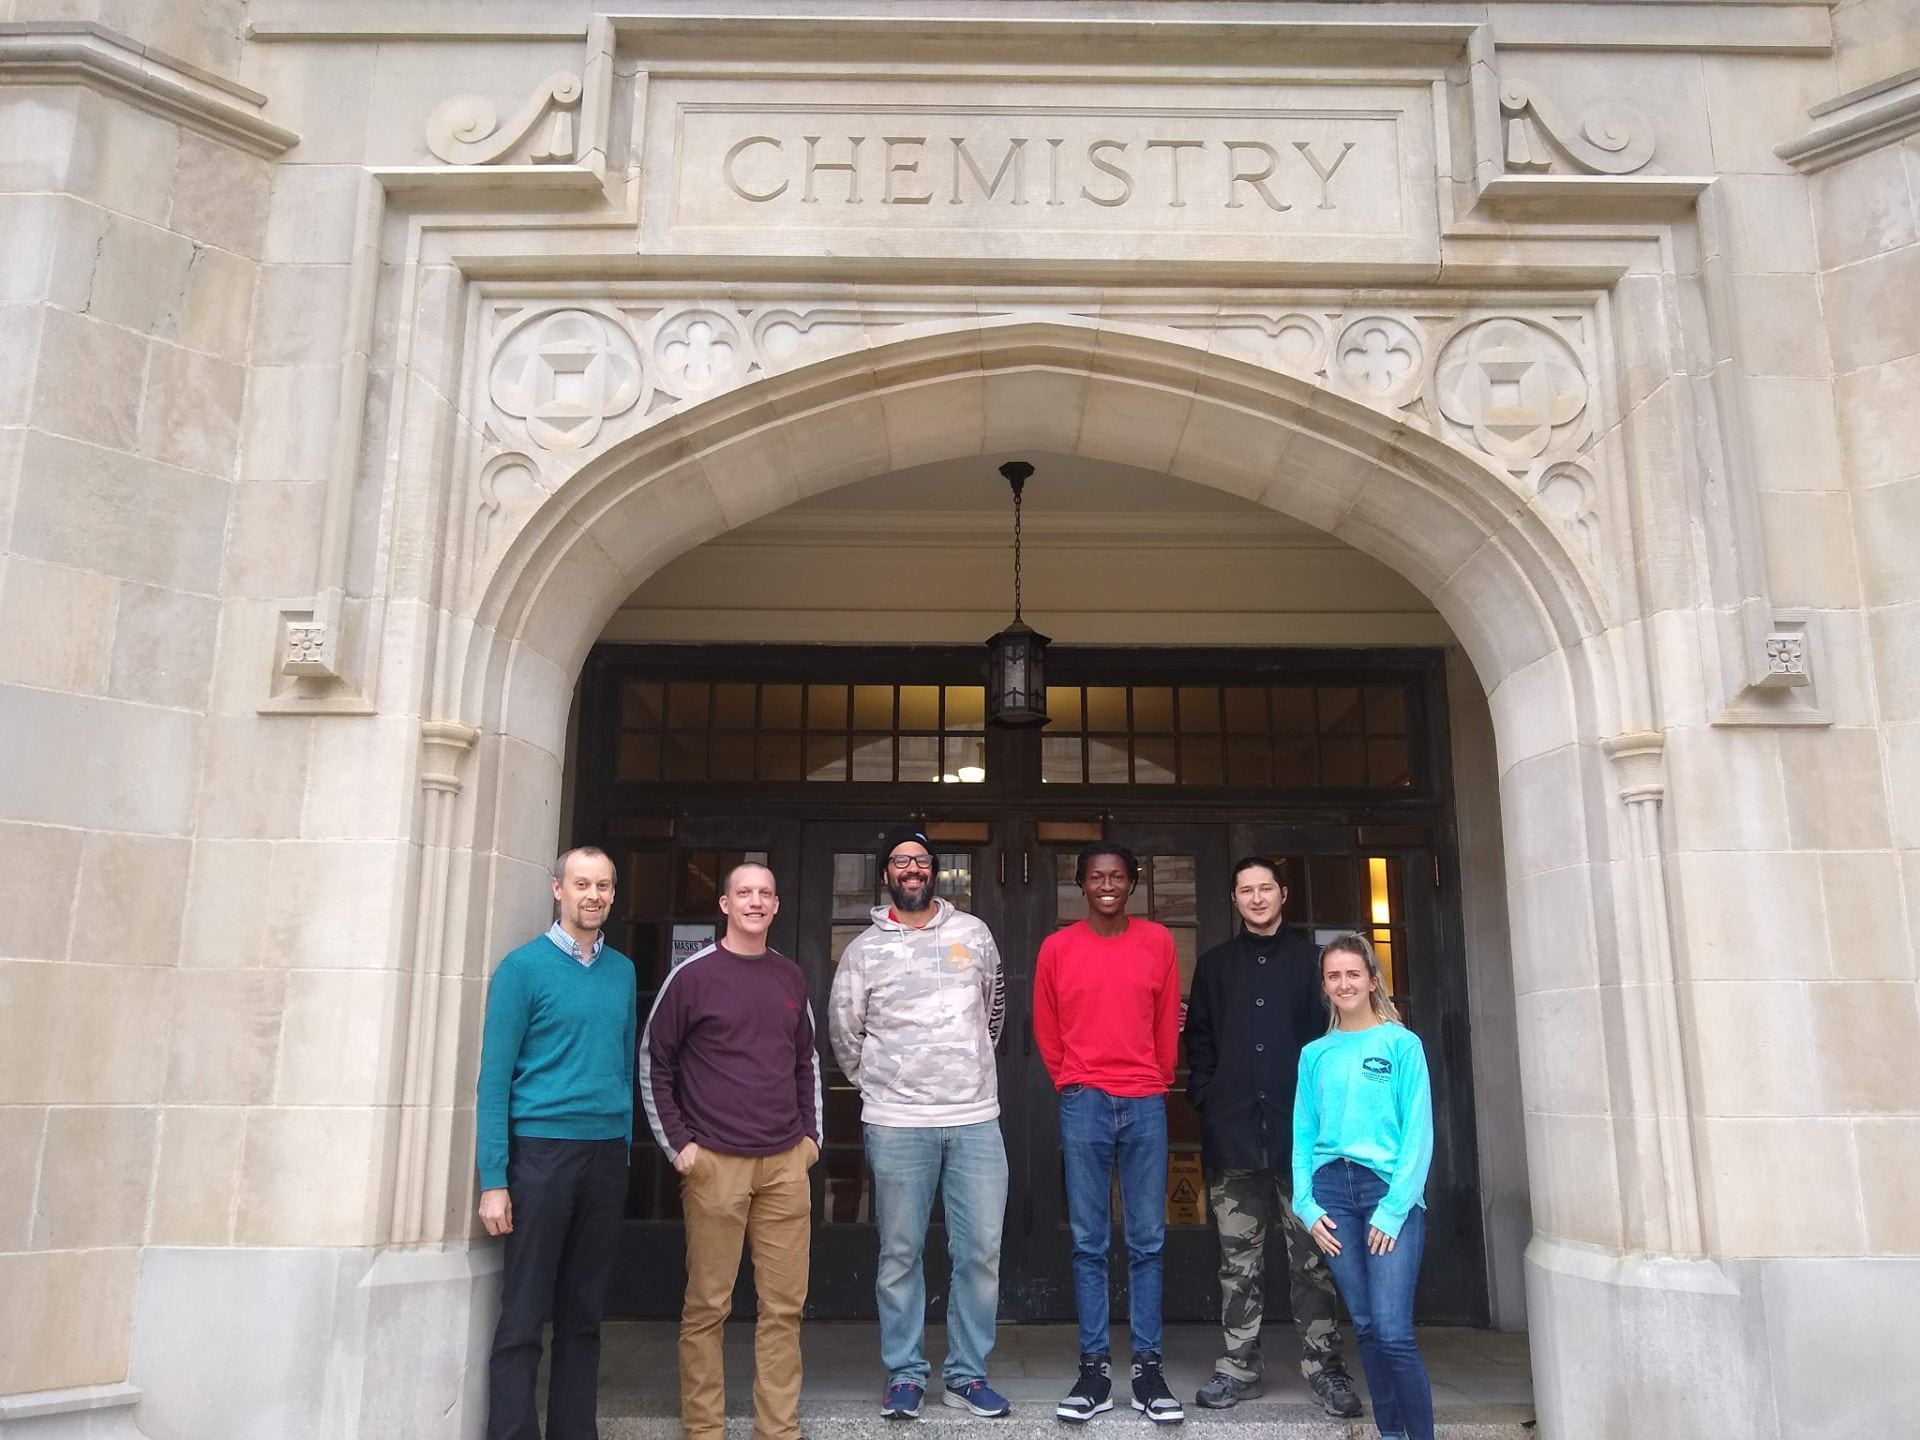 The Edwards Group poses for a group photo in front of the Chemistry Building